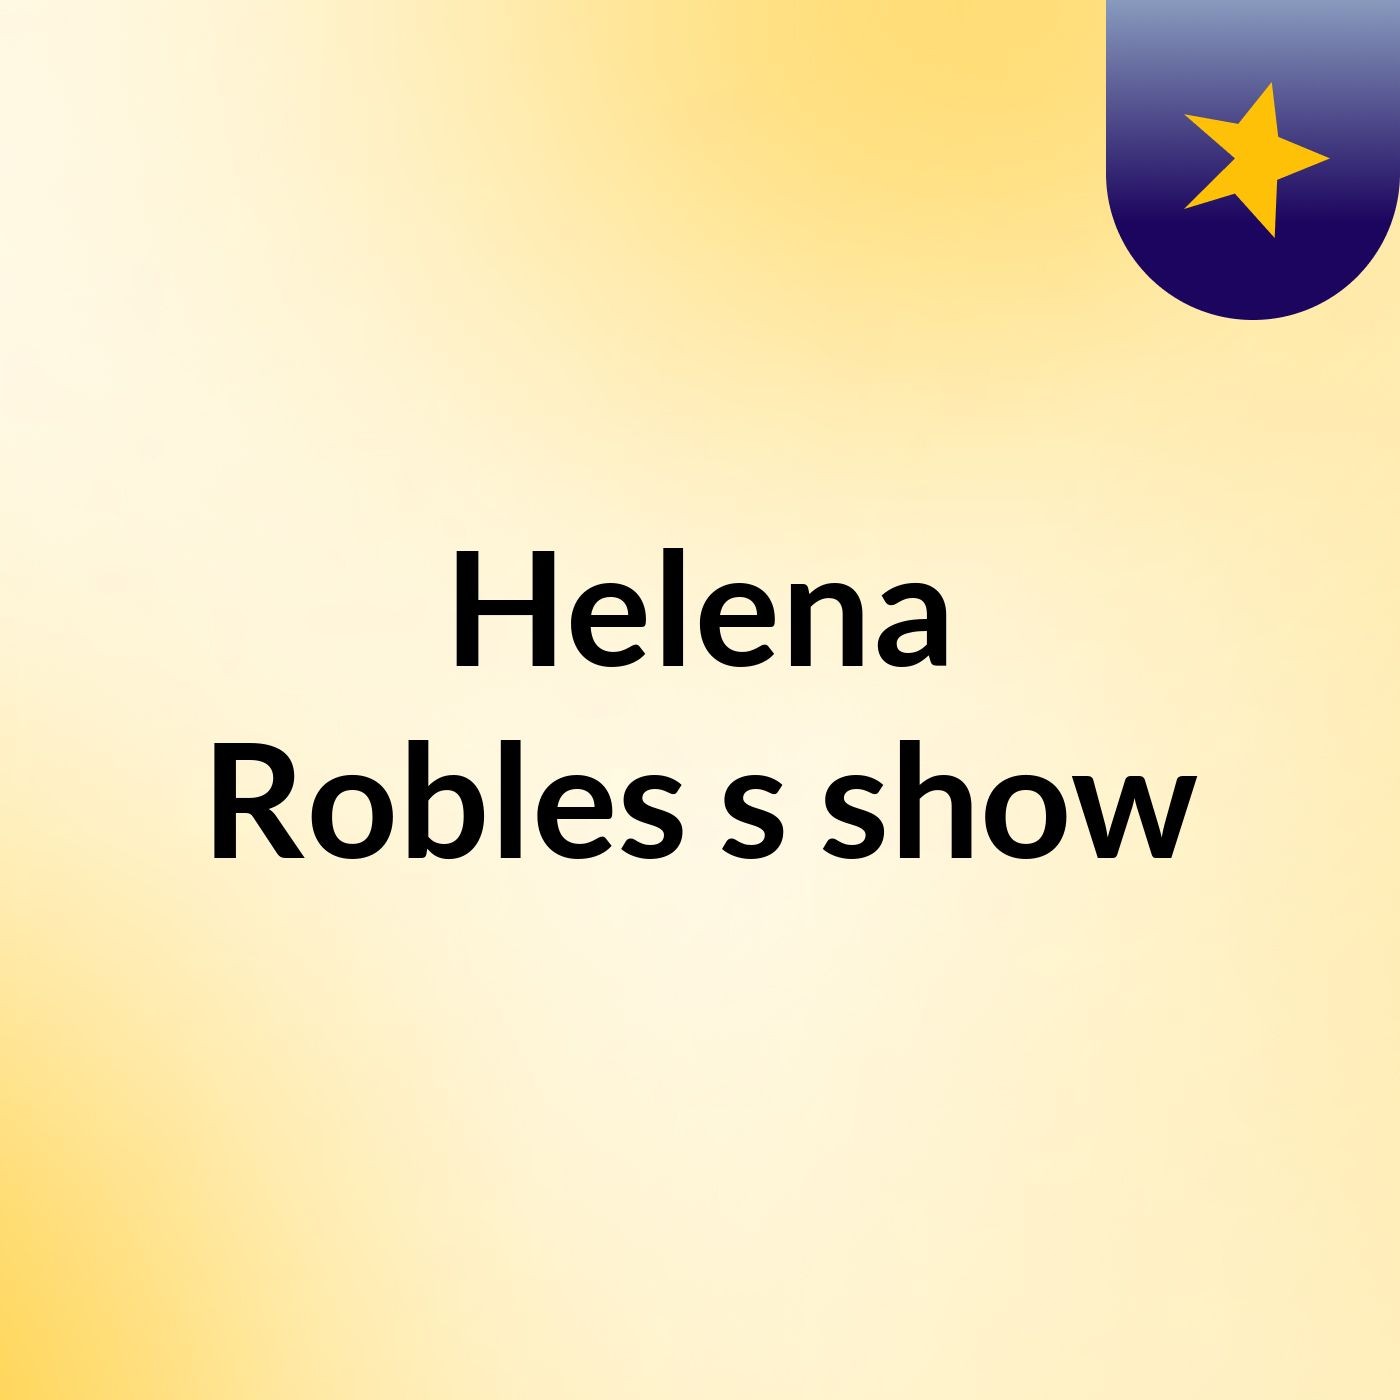 Helena Robles's show